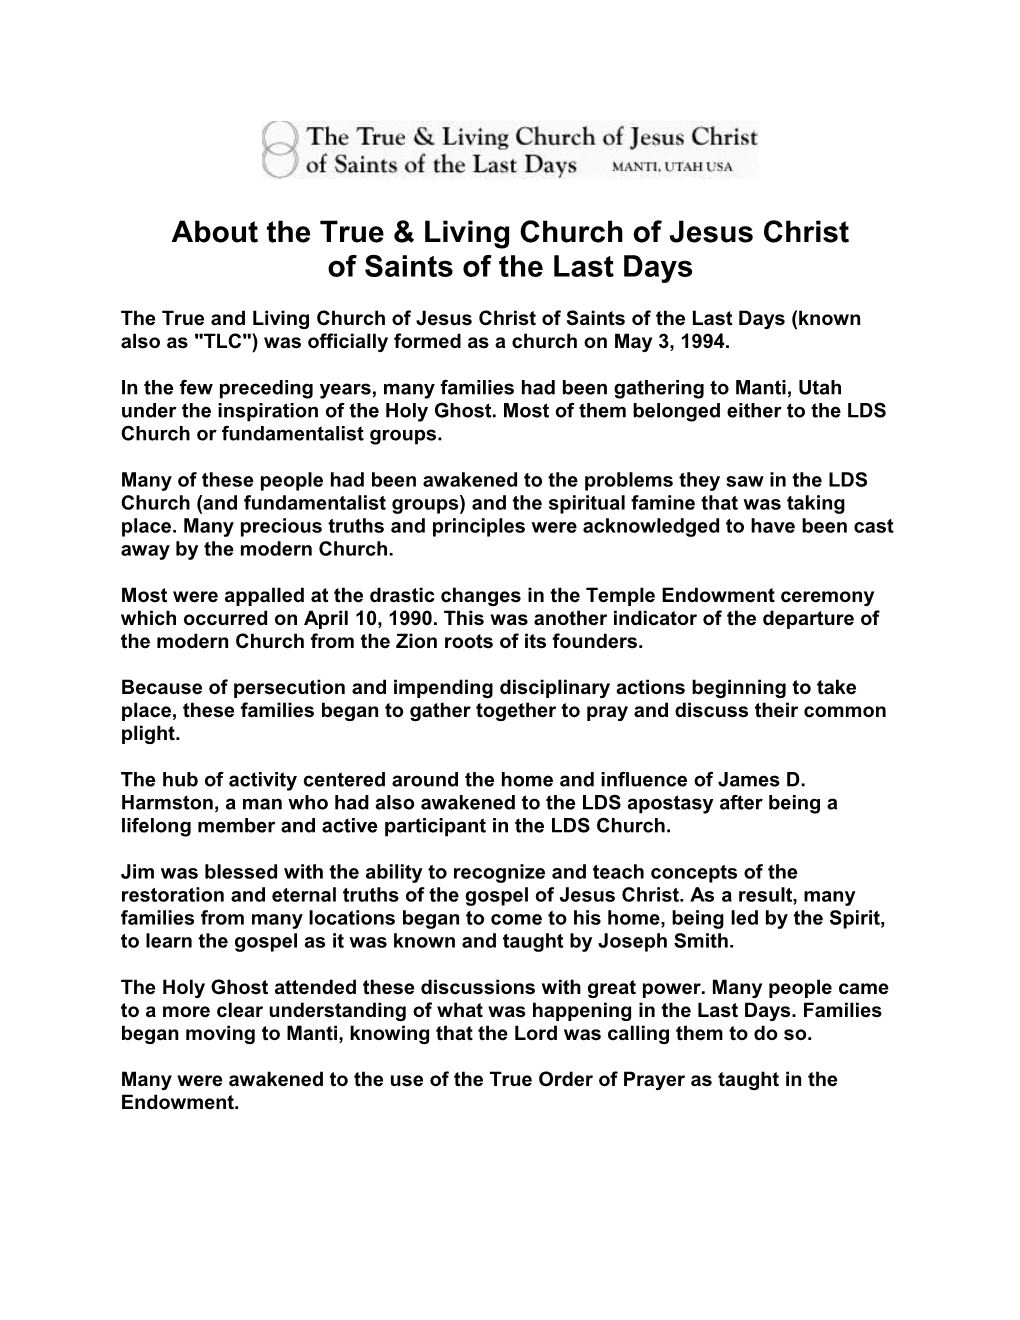 About the True & Living Church of Jesus Christ